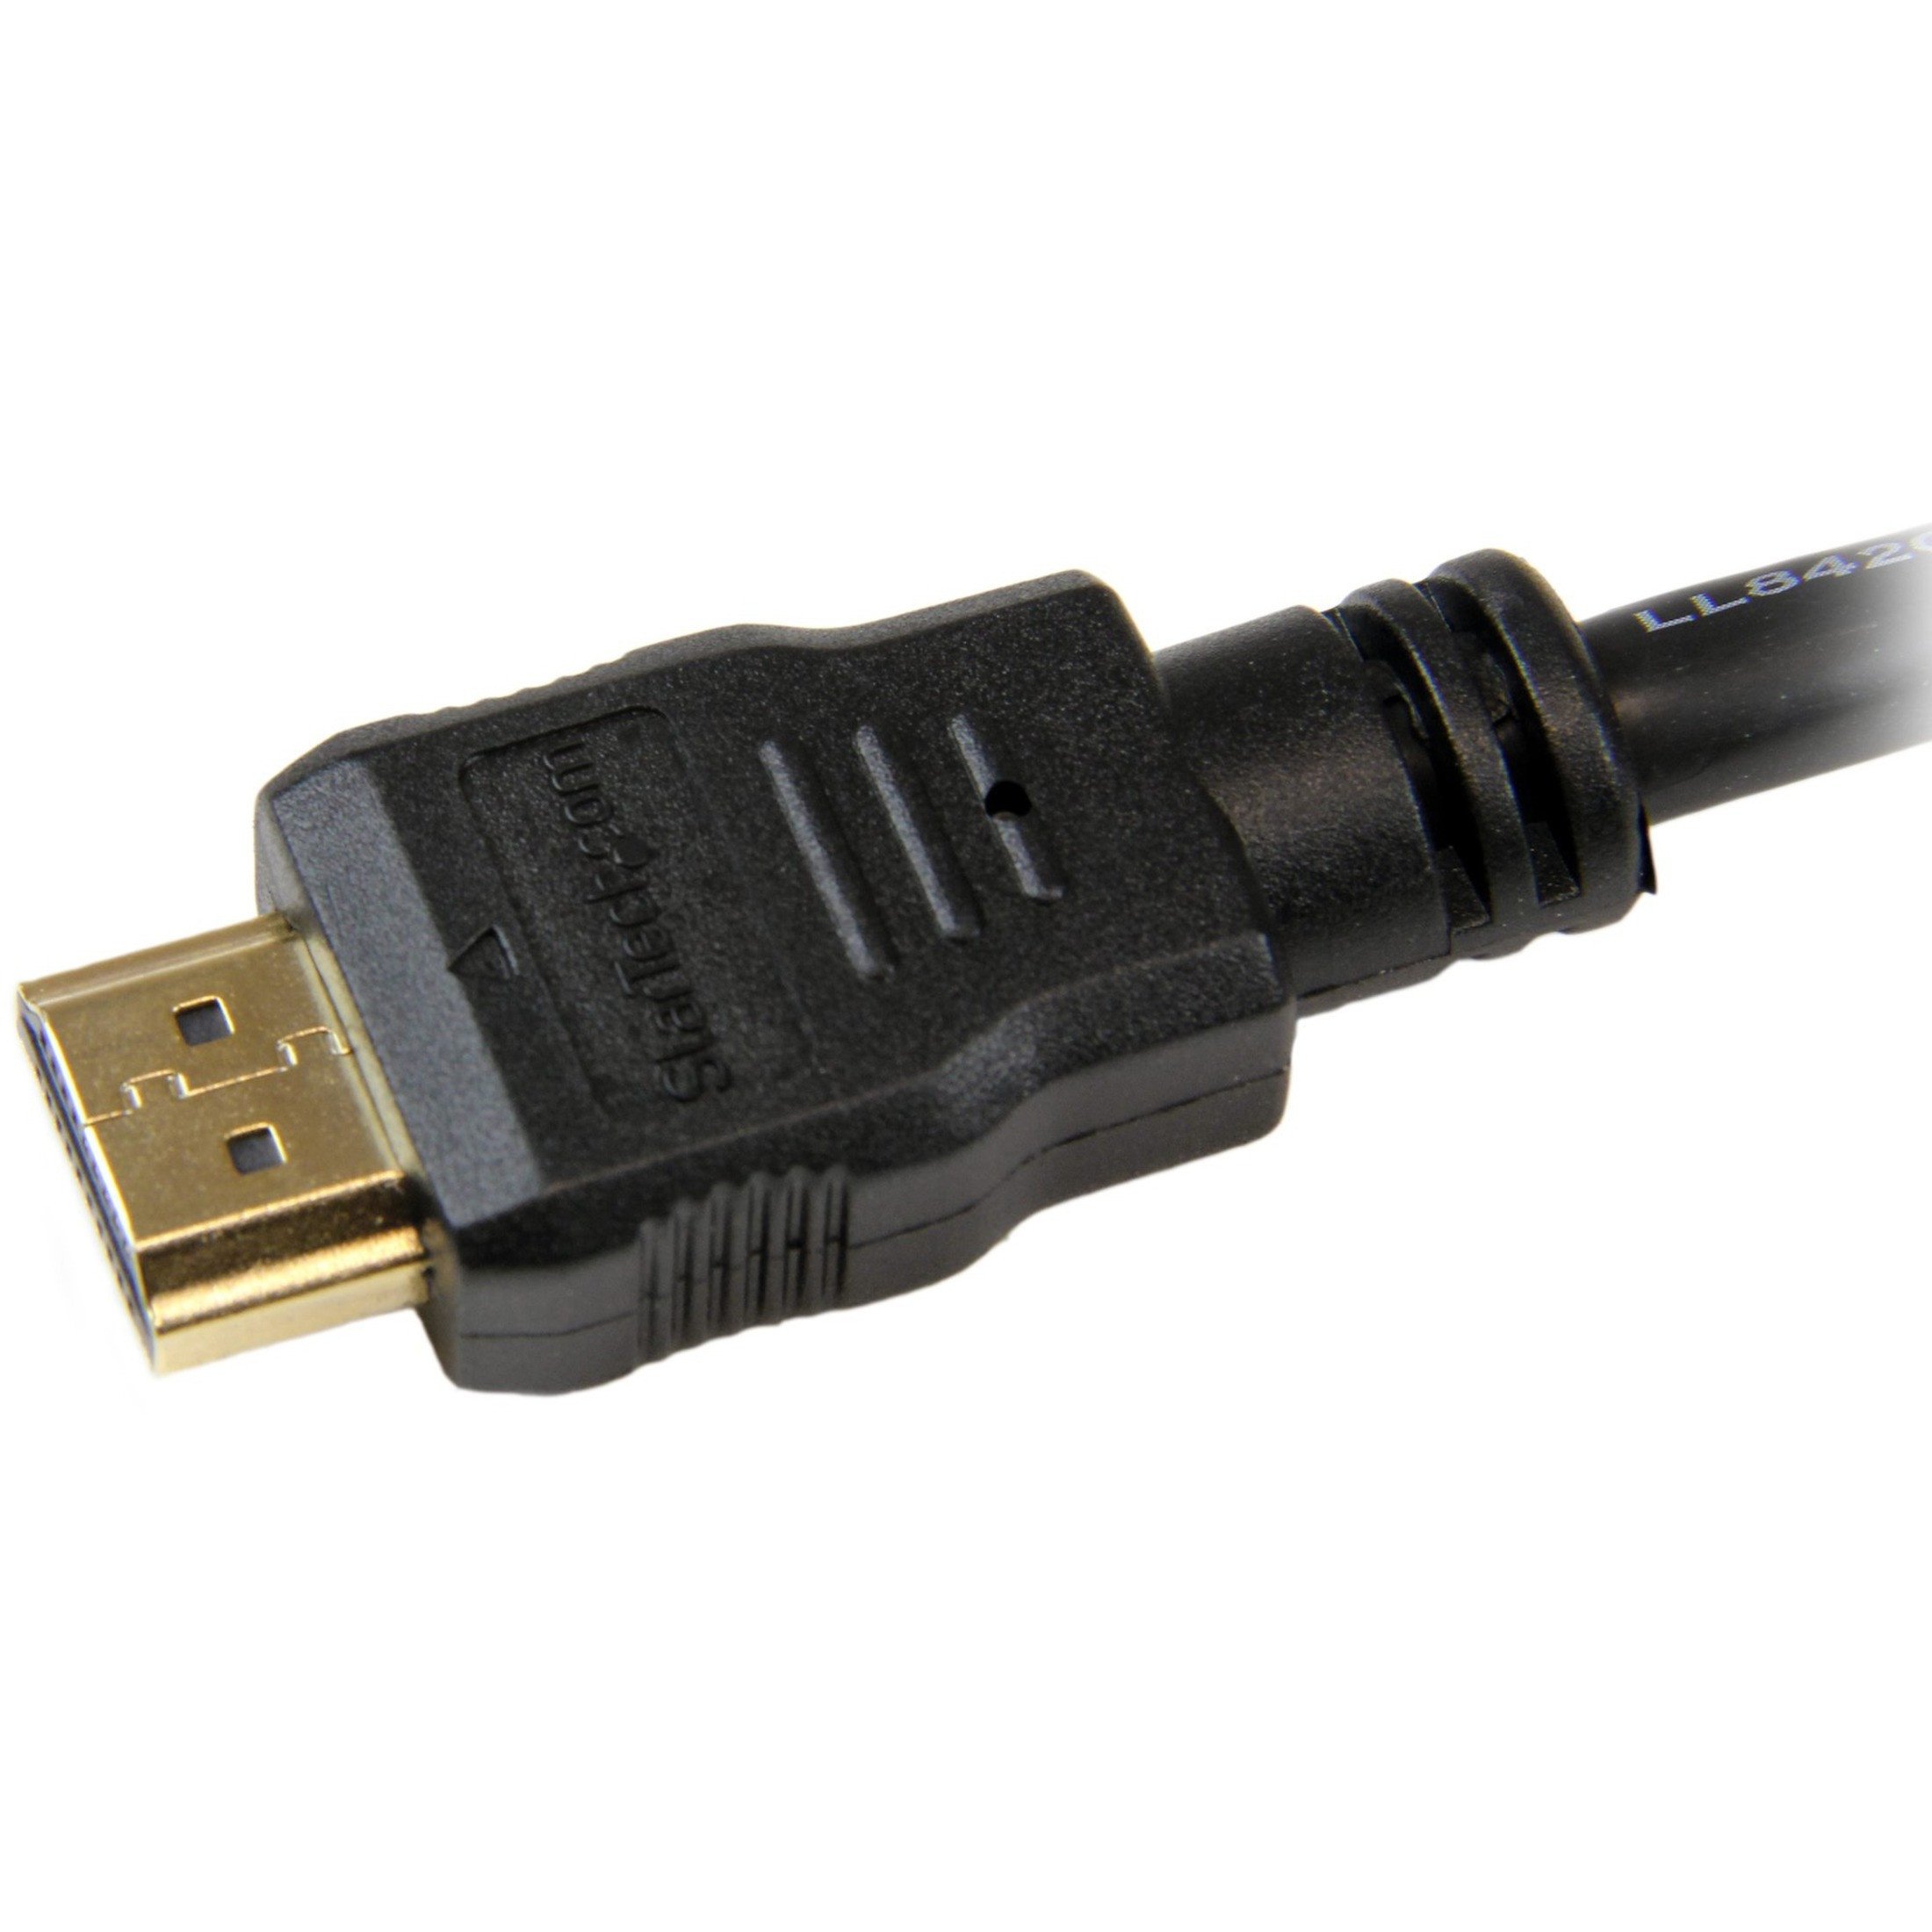 krak håndjern nøgen Startech .com 10ft/3m HDMI Cable, 4K High Speed HDMI Cable with Ethernet,  Ultra HD 4K 30Hz Video, HDMI 1.4 Cable, HDMI Monitor Cord, Black10ft...  HDMM10 - Corporate Armor